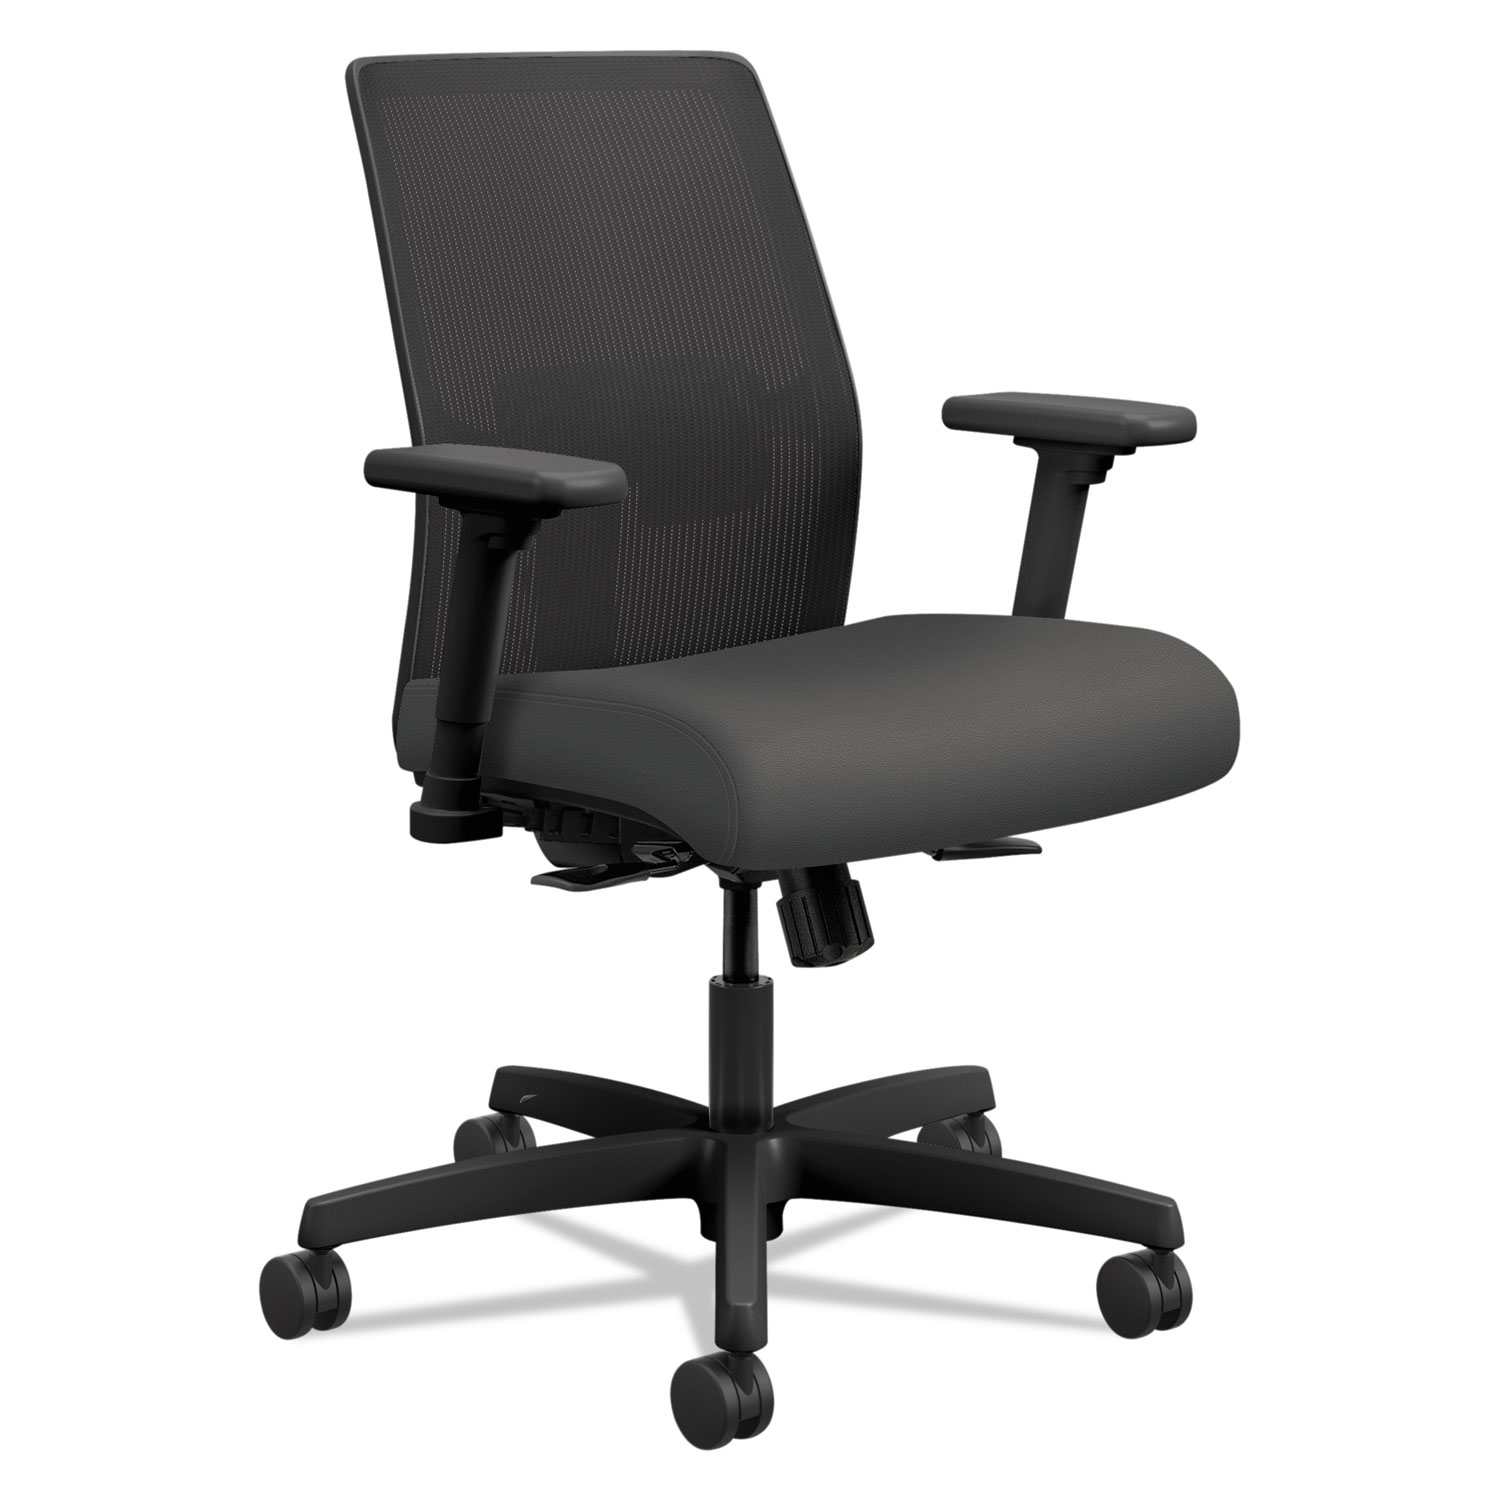  HON HONI2L1AMLC19TK Ignition 2.0 4-Way Stretch Low-Back Mesh Task Chair, Supports up to 300 lbs., Iron Ore Seat, Black Back/Base (HONI2L1AMLC19TK) 